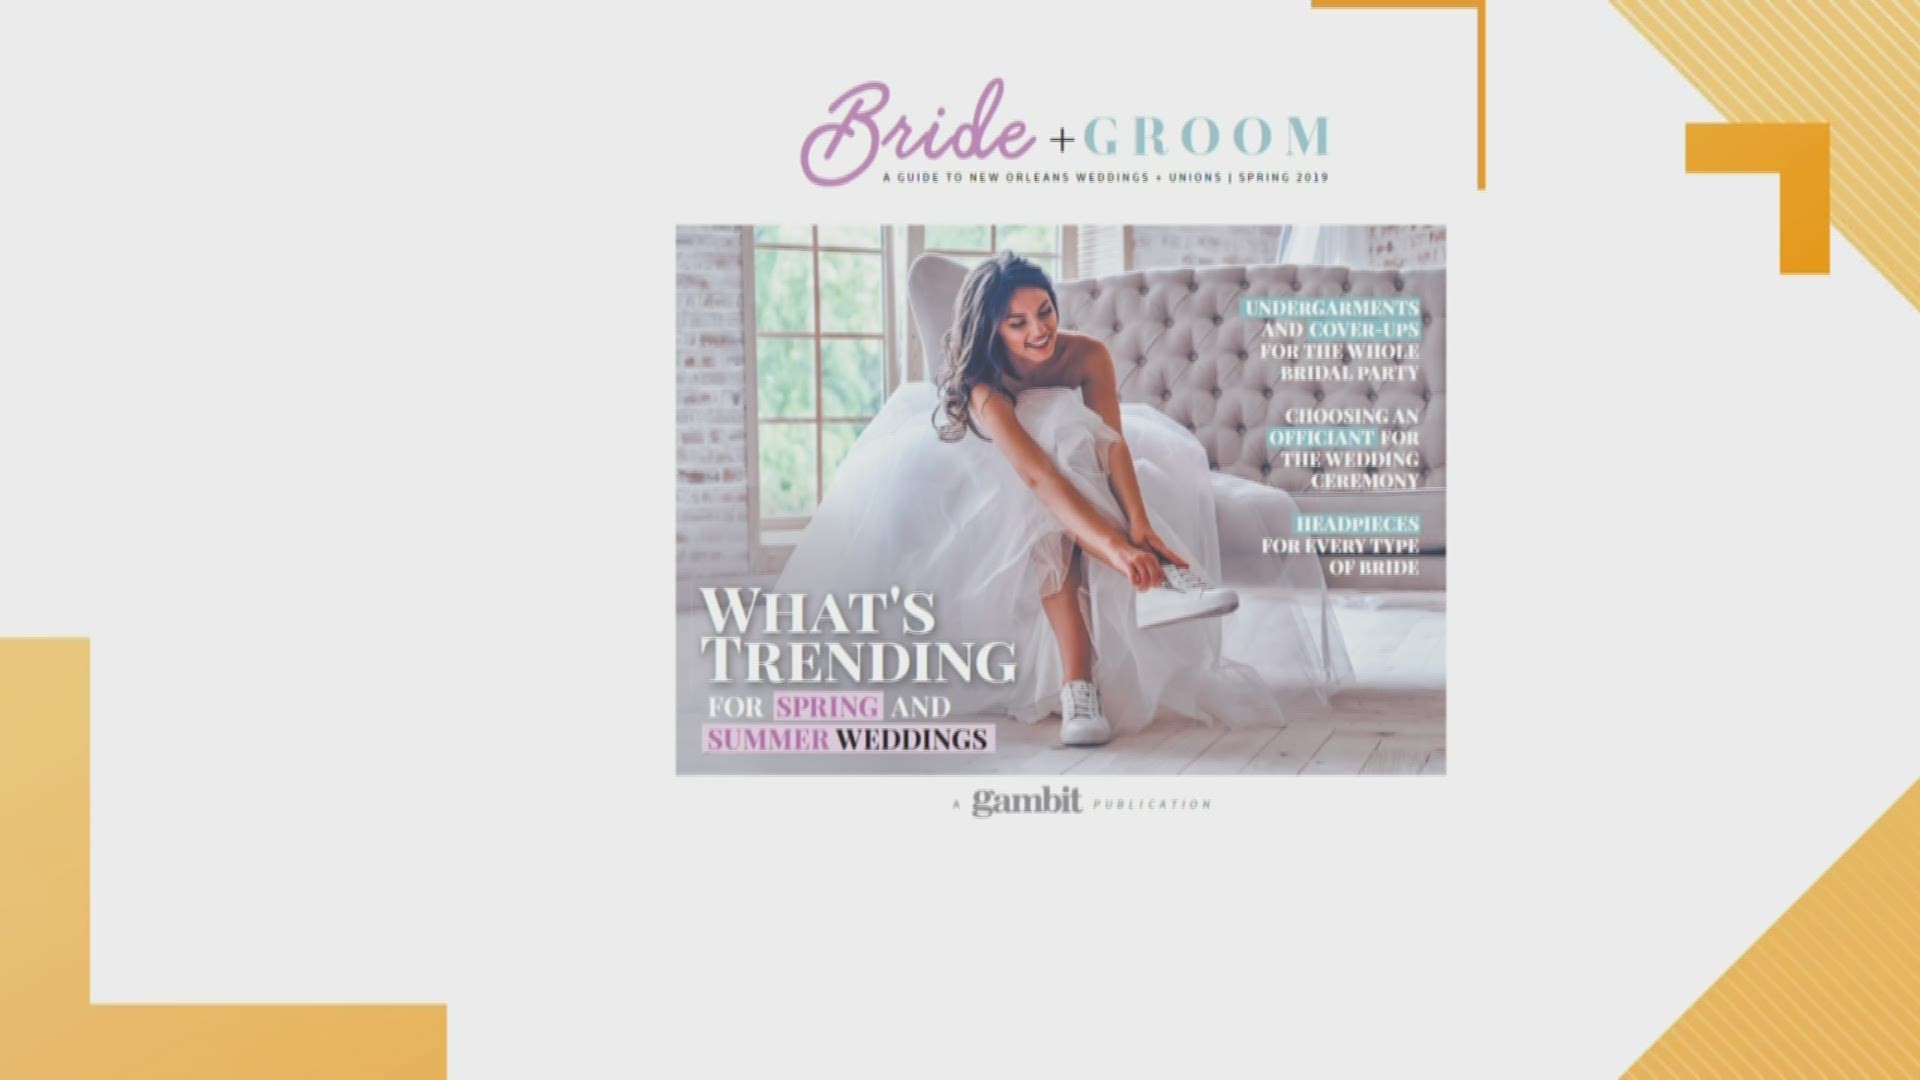 Katherine Johnson is in with the hot new bridal trends in this wedding issue of Cue Magazine.